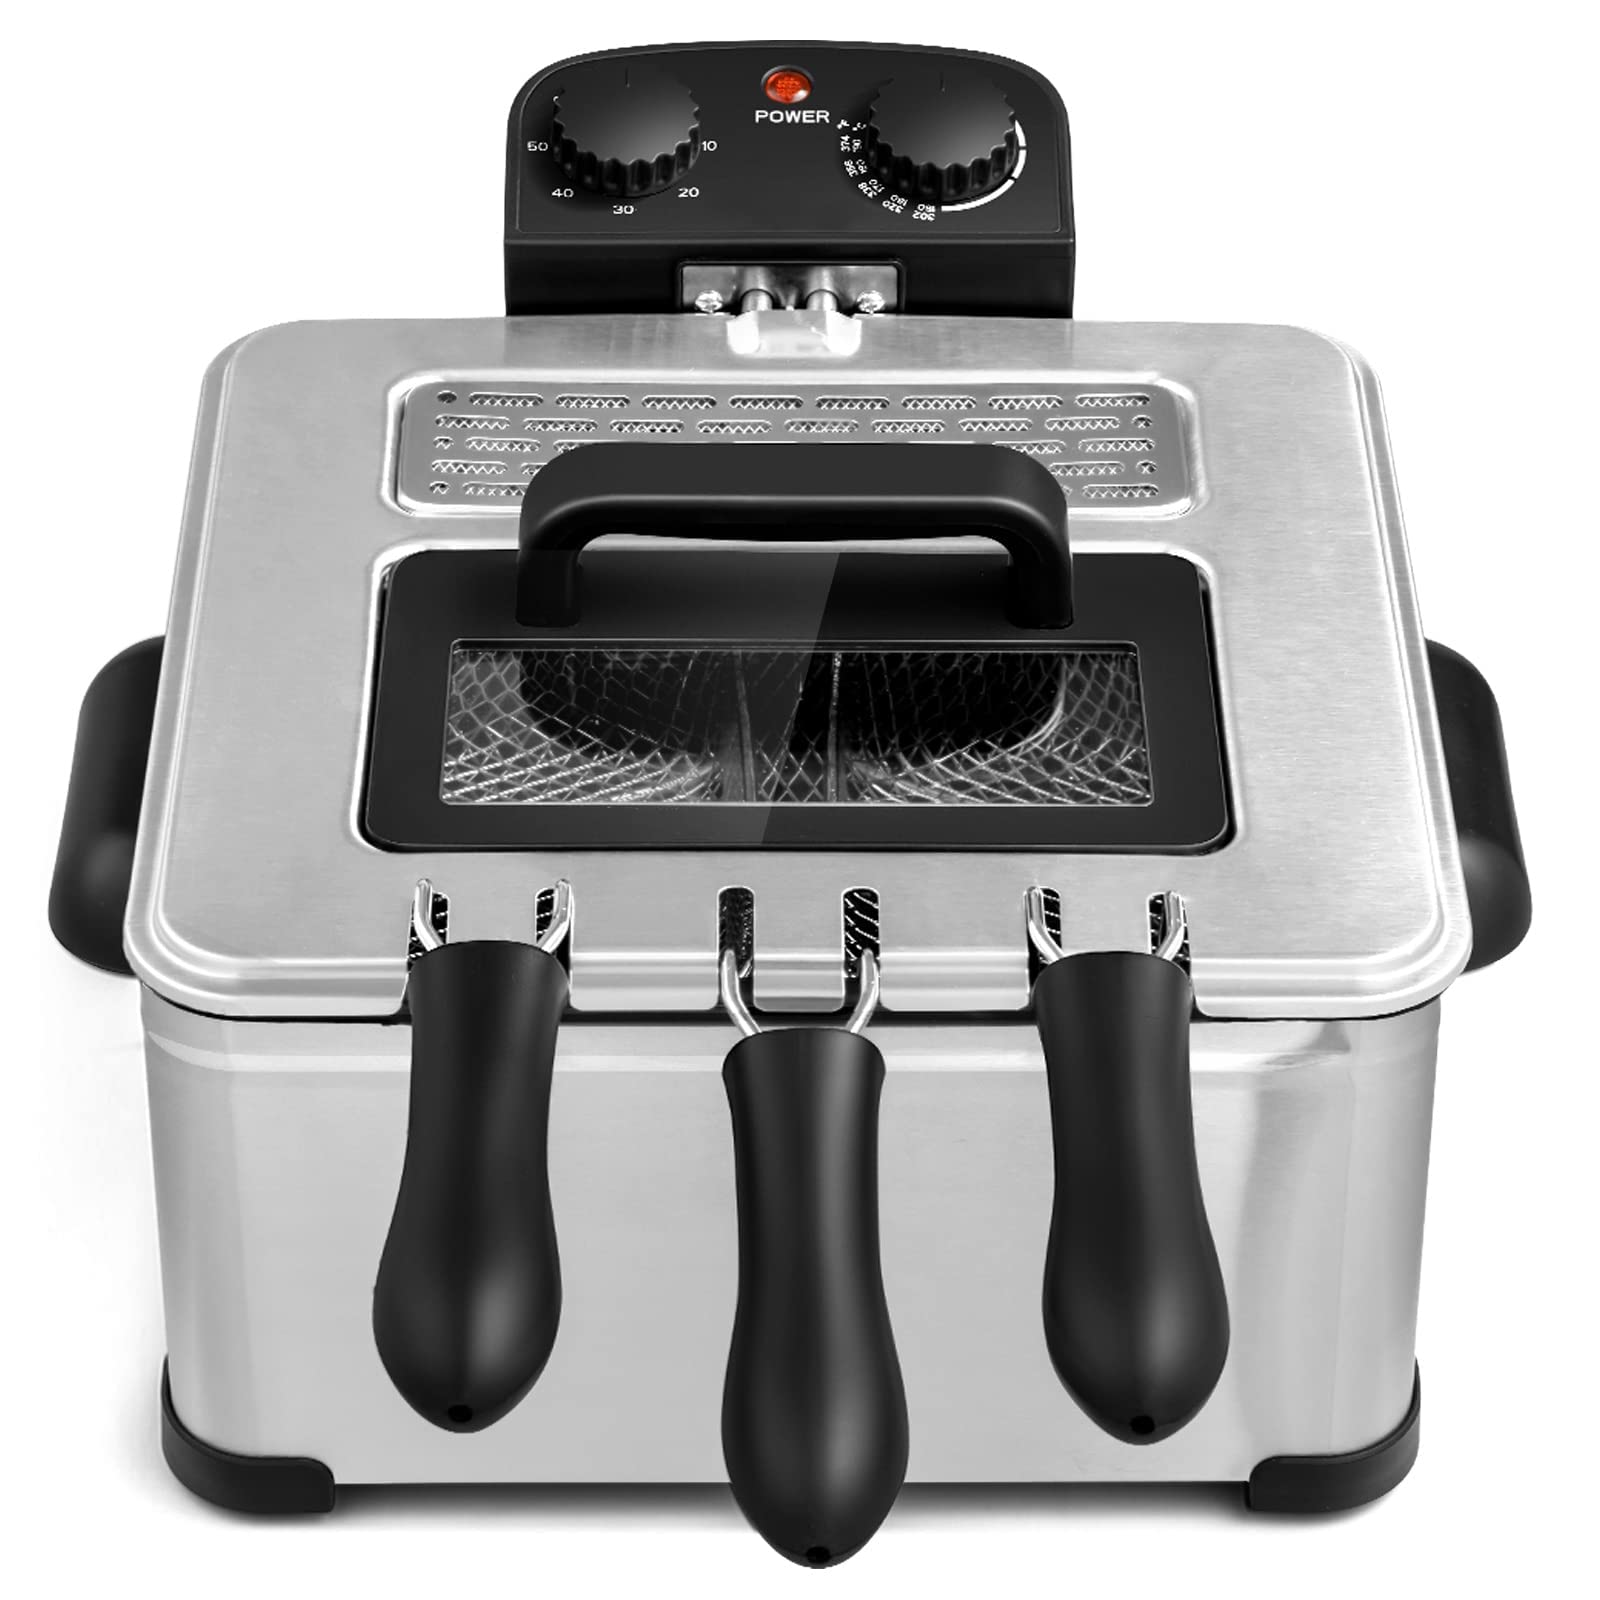 Giantex 1700W Electric Deep Fryer with 3 Baskets, 5.3QT/21-Cup Frier Cookers Home Fryer